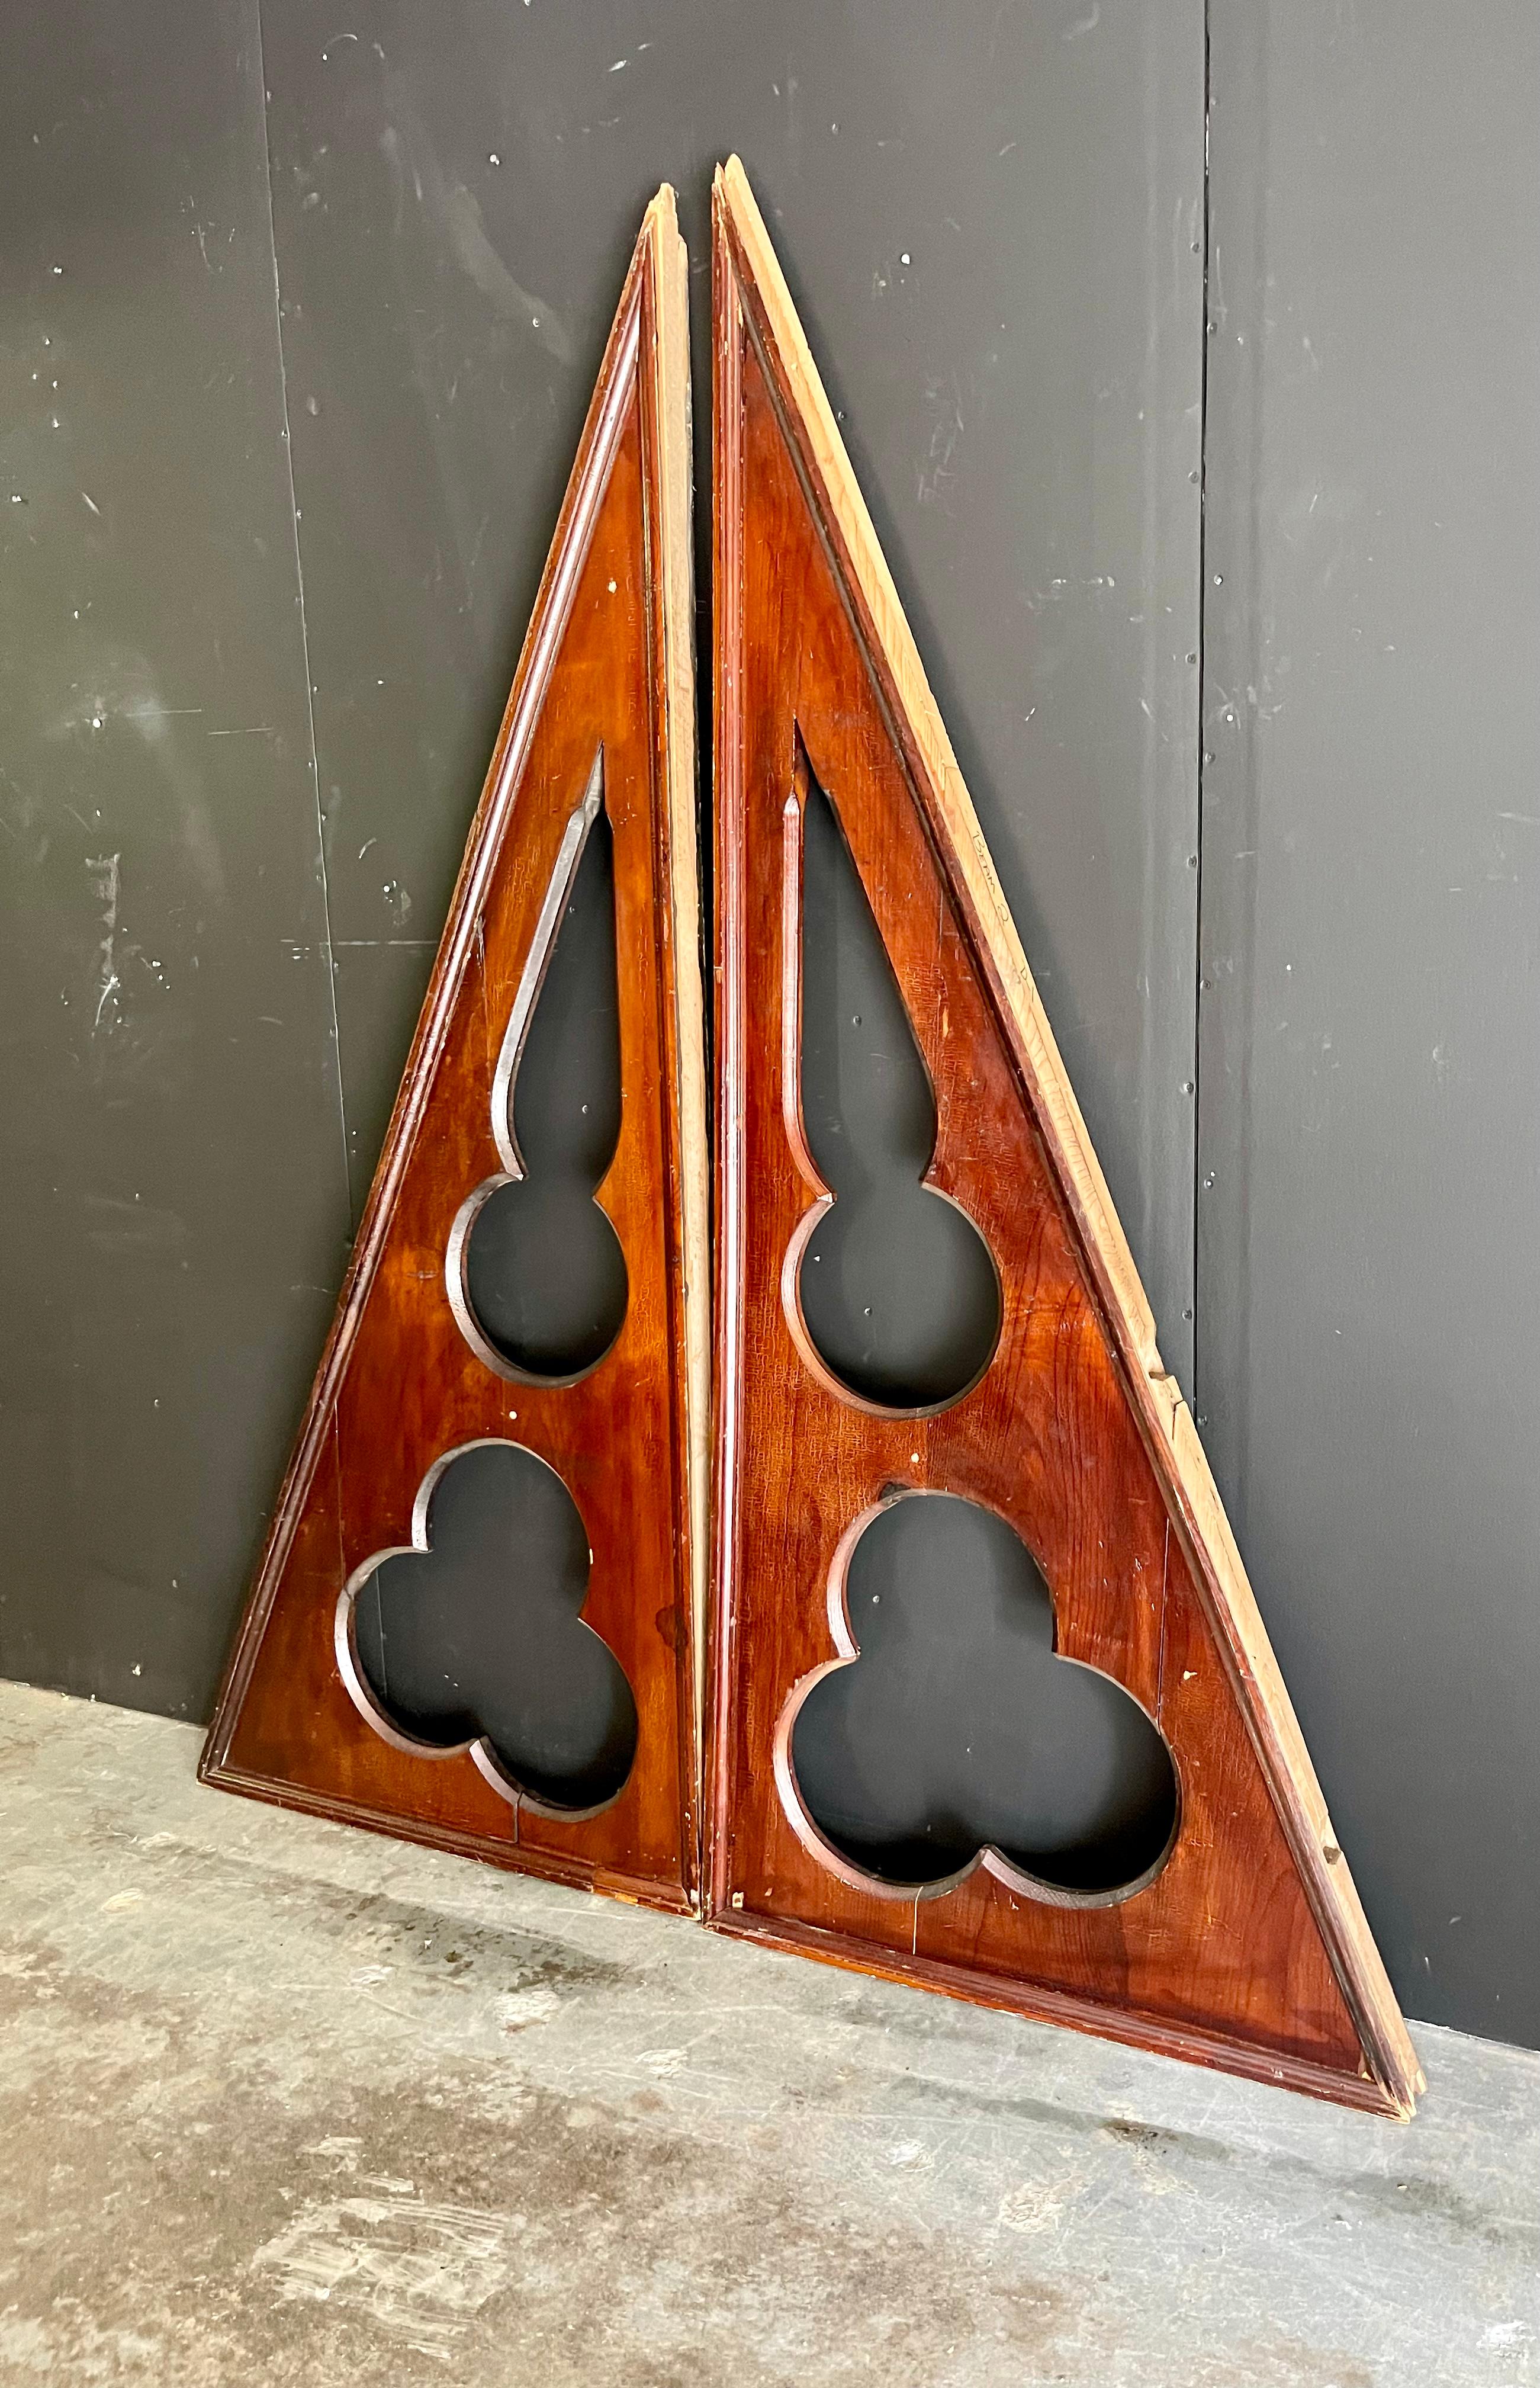 Wonderful pair of Mid Century gabled church corbels with 3 leaf clover cut out saved from demolition from a St. Louis Methodist church. Beautiful rich wood tones add style and warmth with a touch of modern. Would be great incorporated into a new